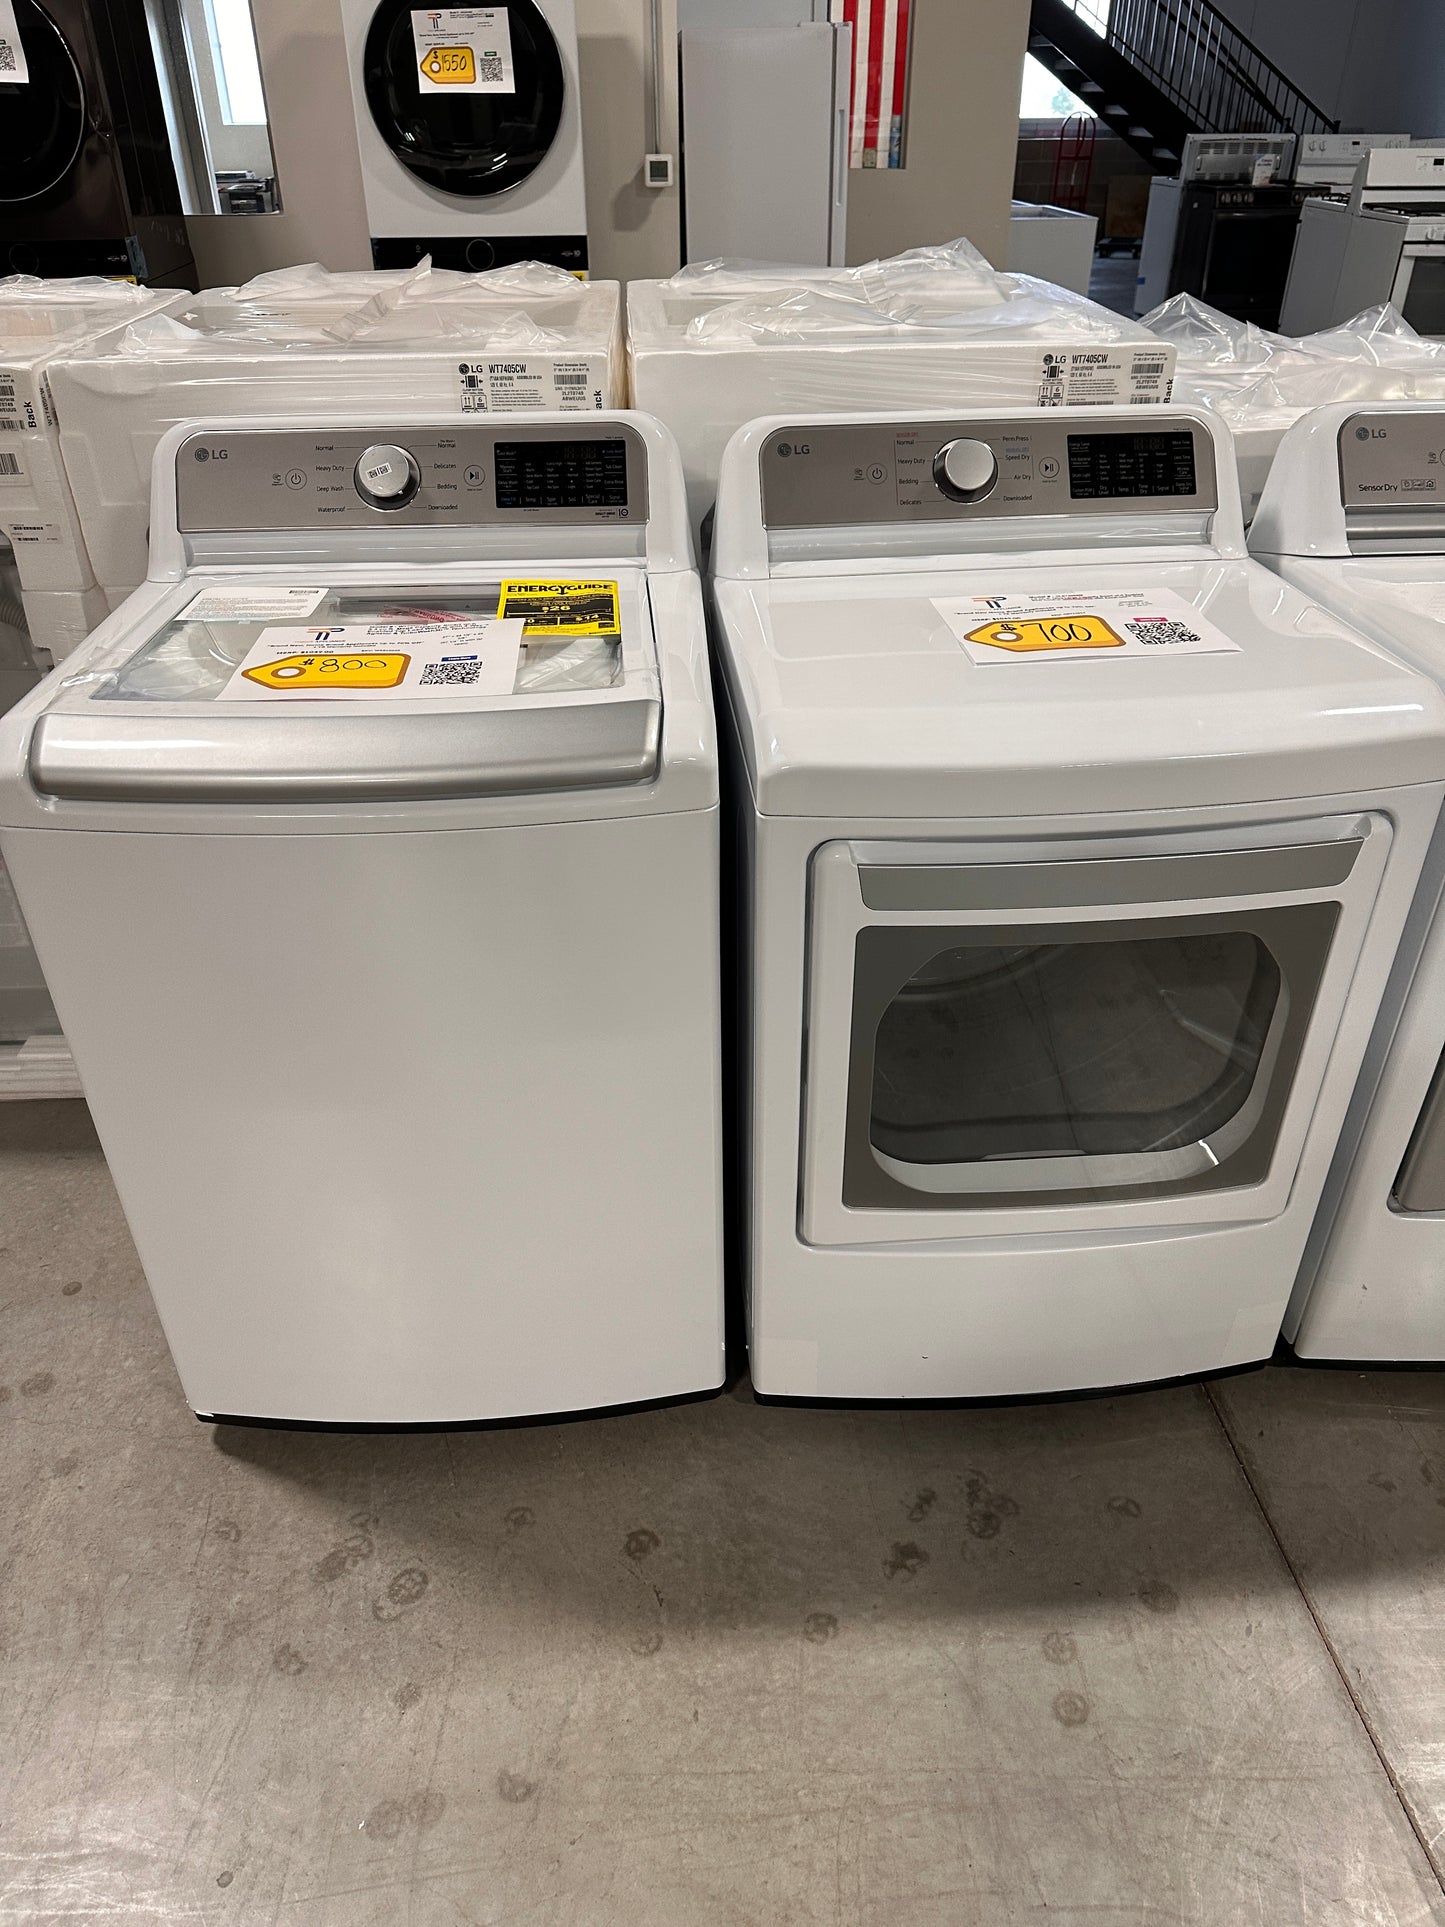 BRAND NEW TOP LOAD LG WASHER DRYER SET - WAS13022 WT7405CW - DRY12314 DLE7400WE